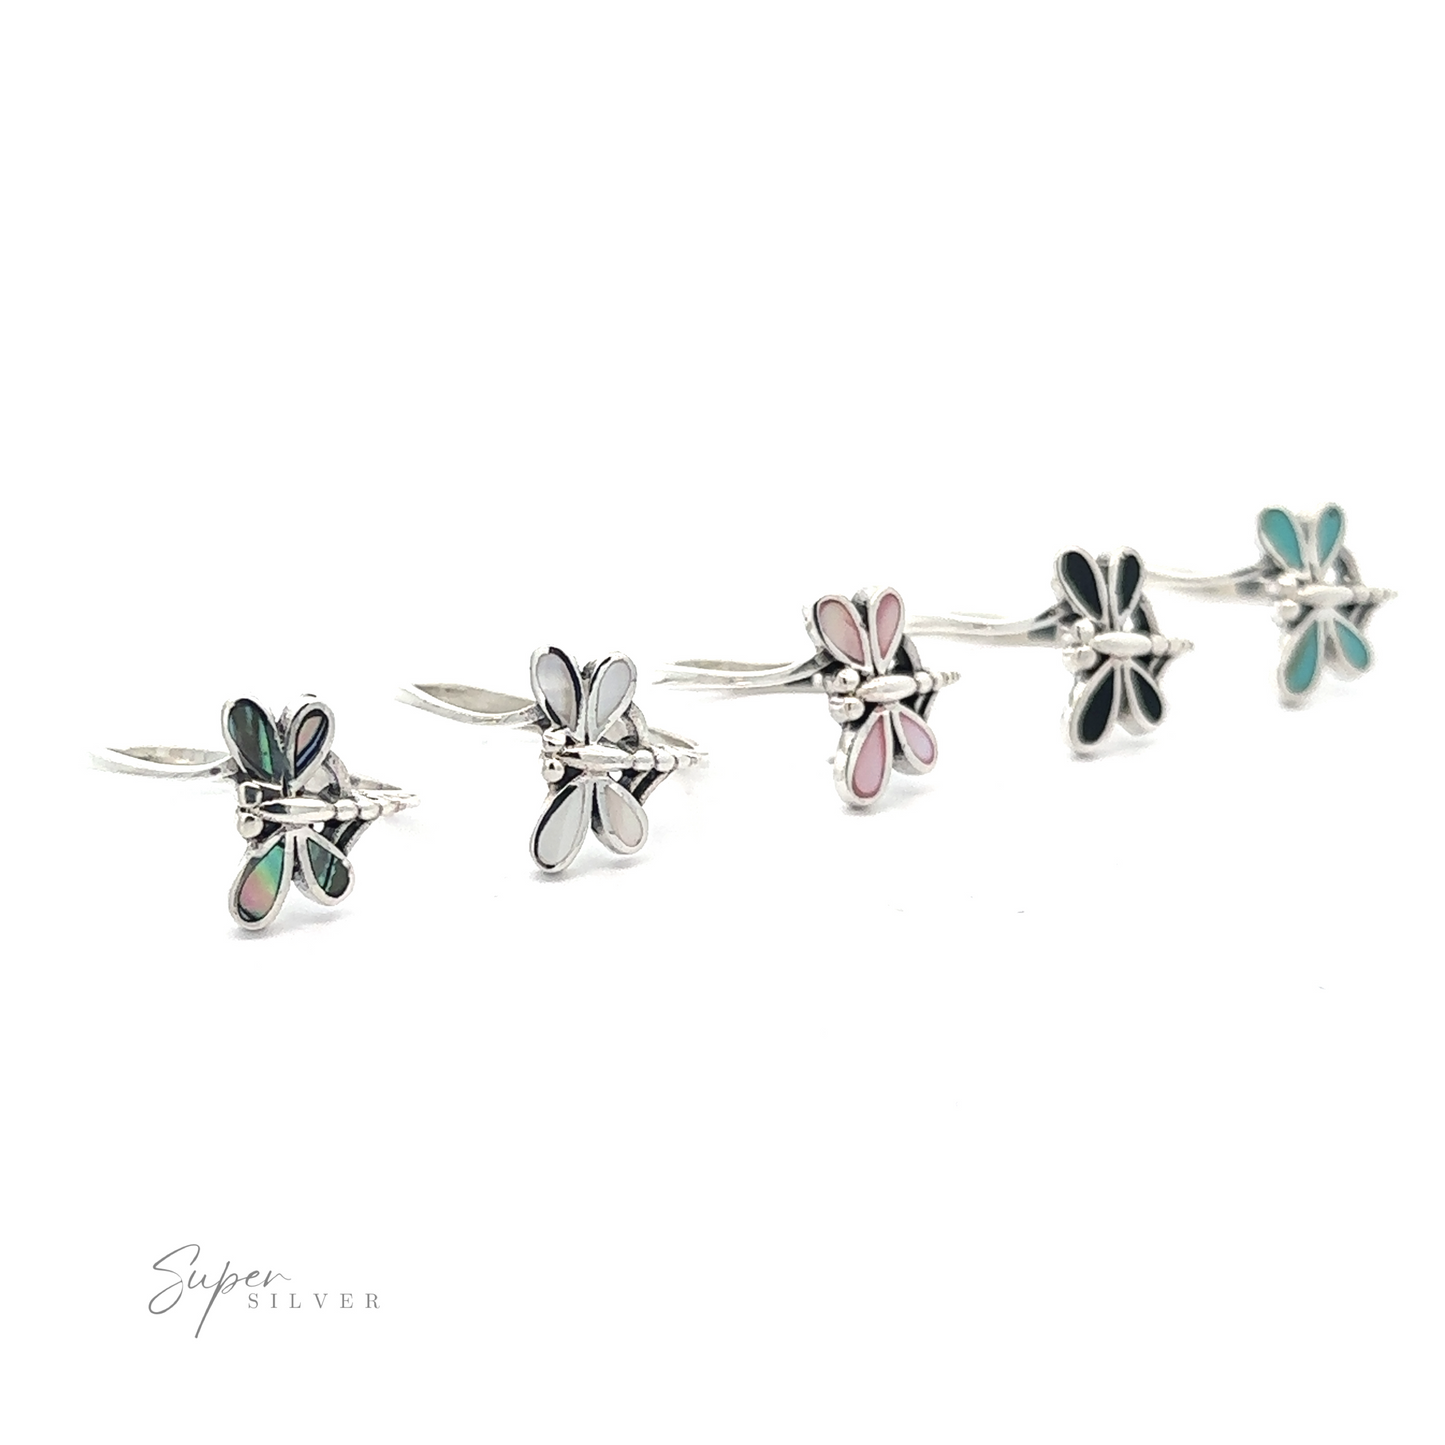 A display of four Inlaid Stone Dragonfly rings, crafted from .925 Sterling Silver with varied enamel finishes including Abalone Mother of Pearl, Turquoise, and Onyx.